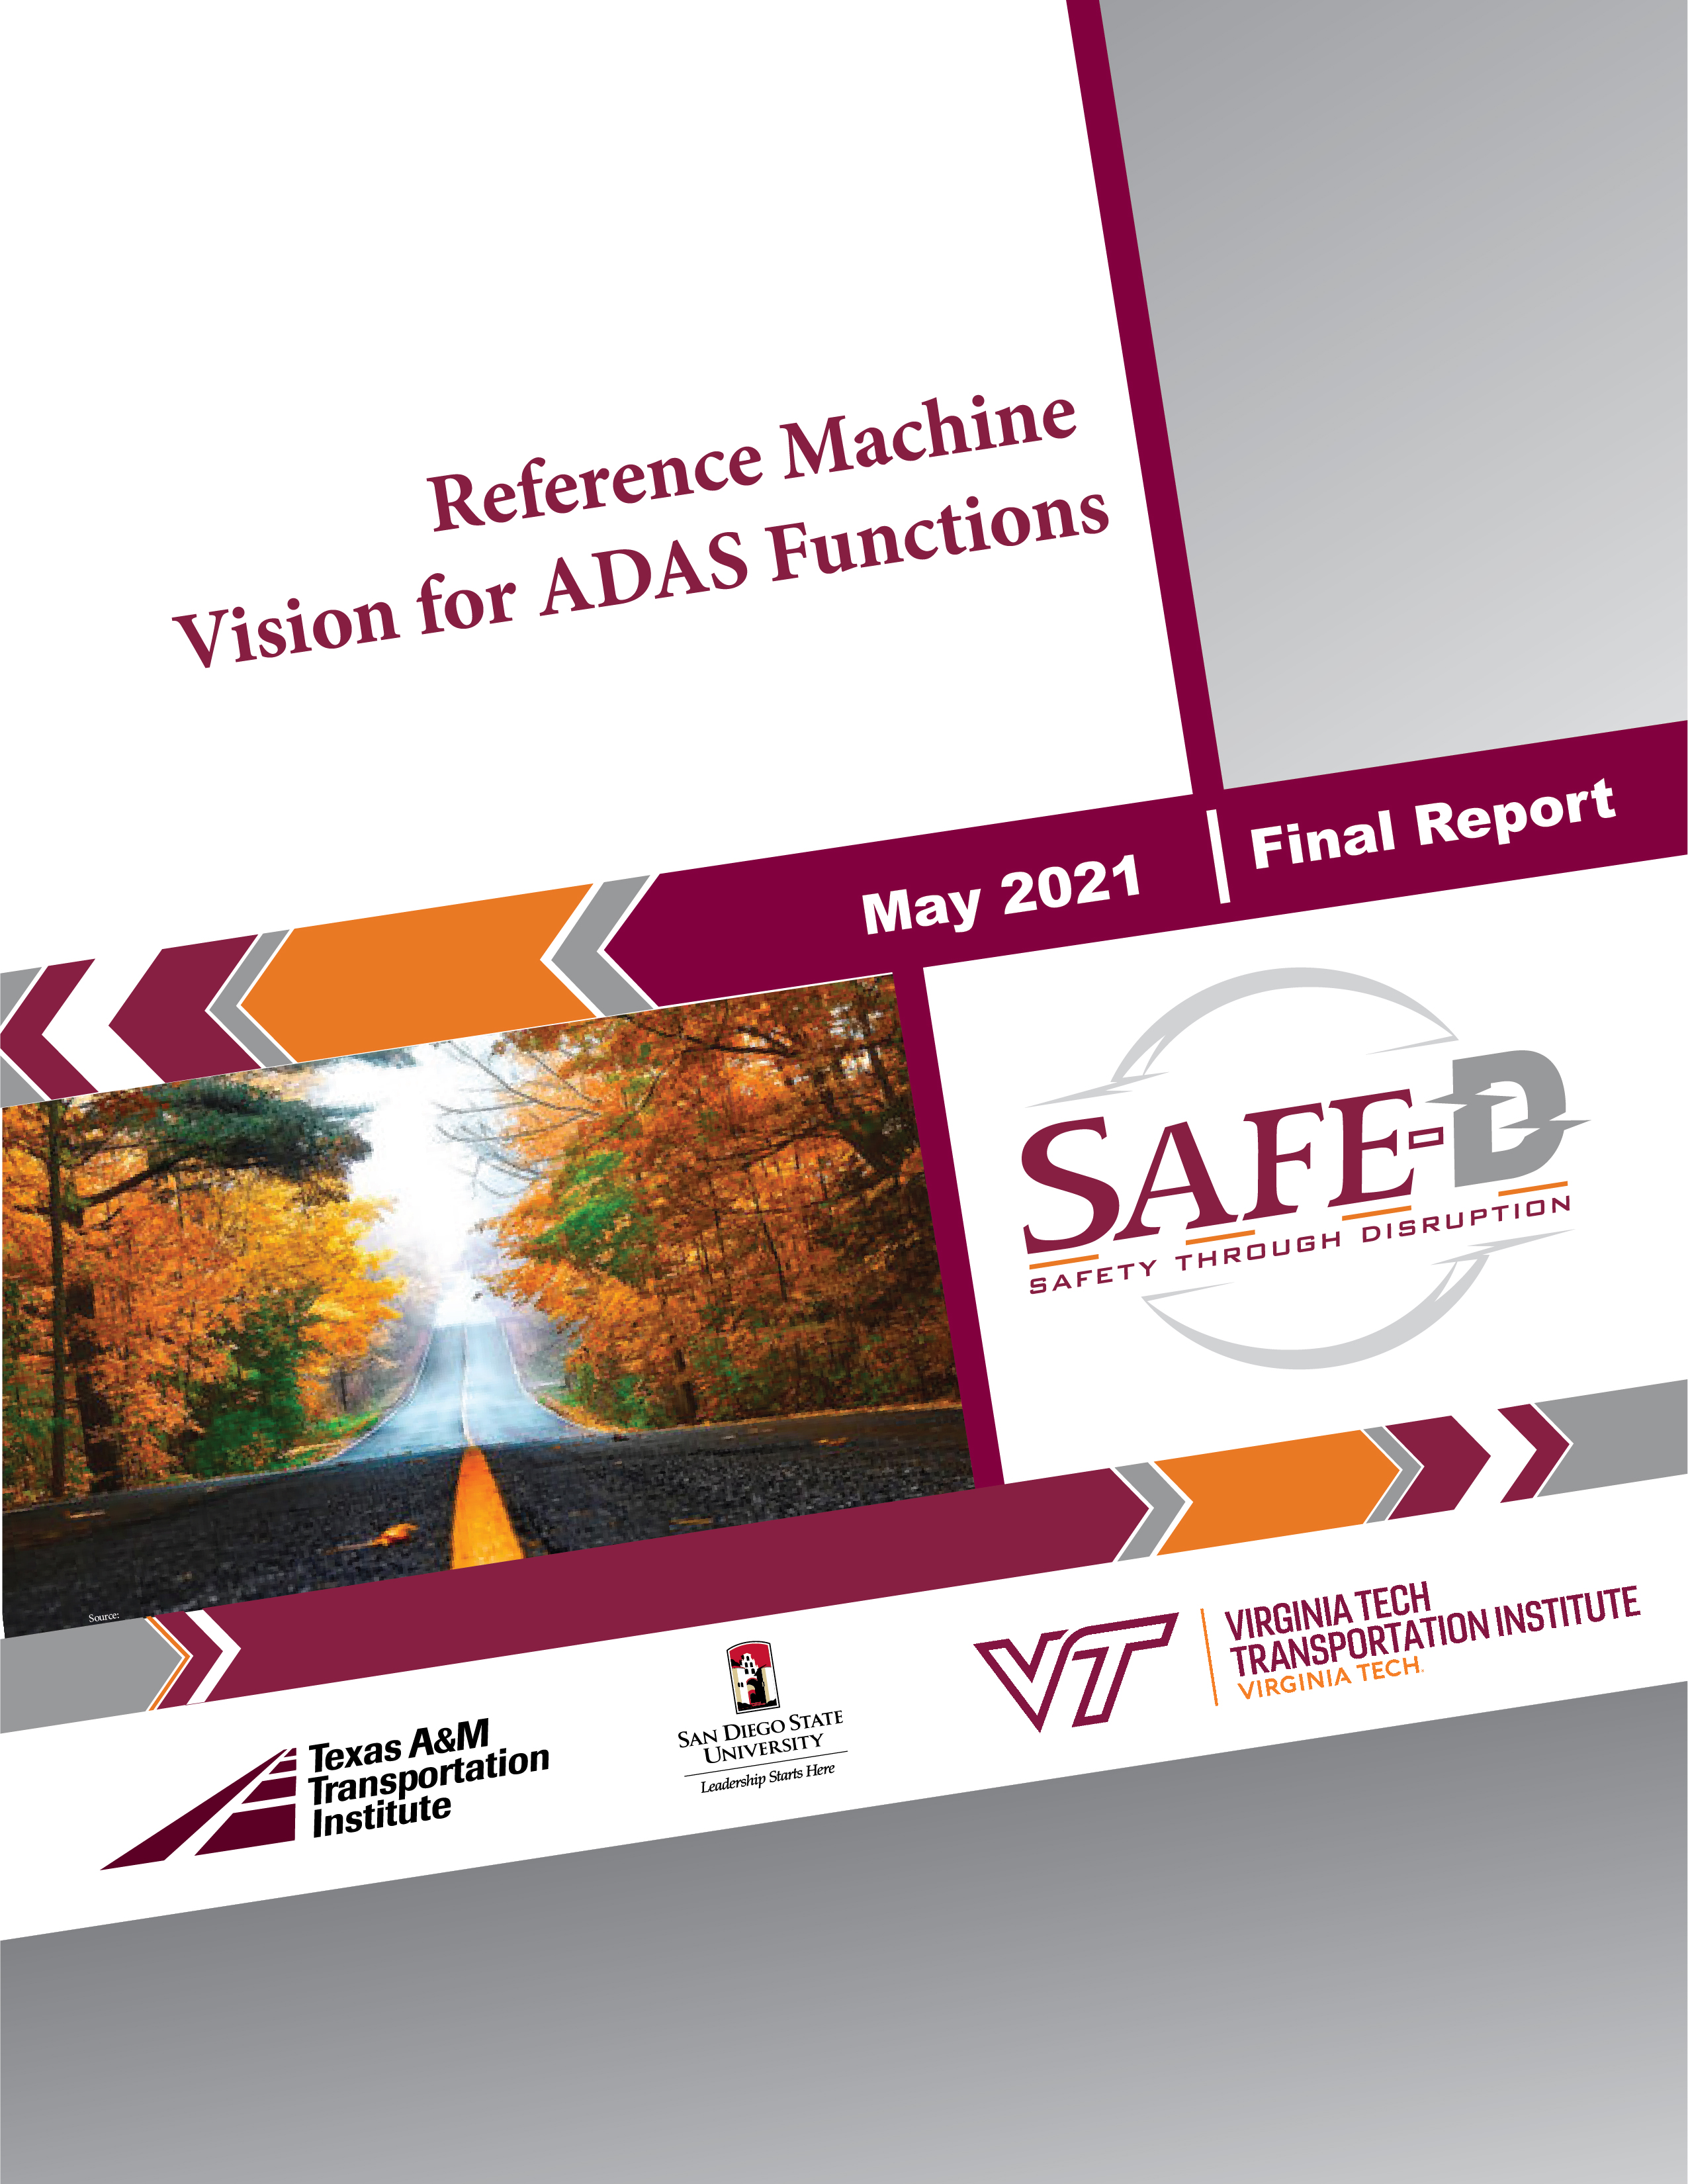 04-115 Reference Machine Vision for ADAS Functions